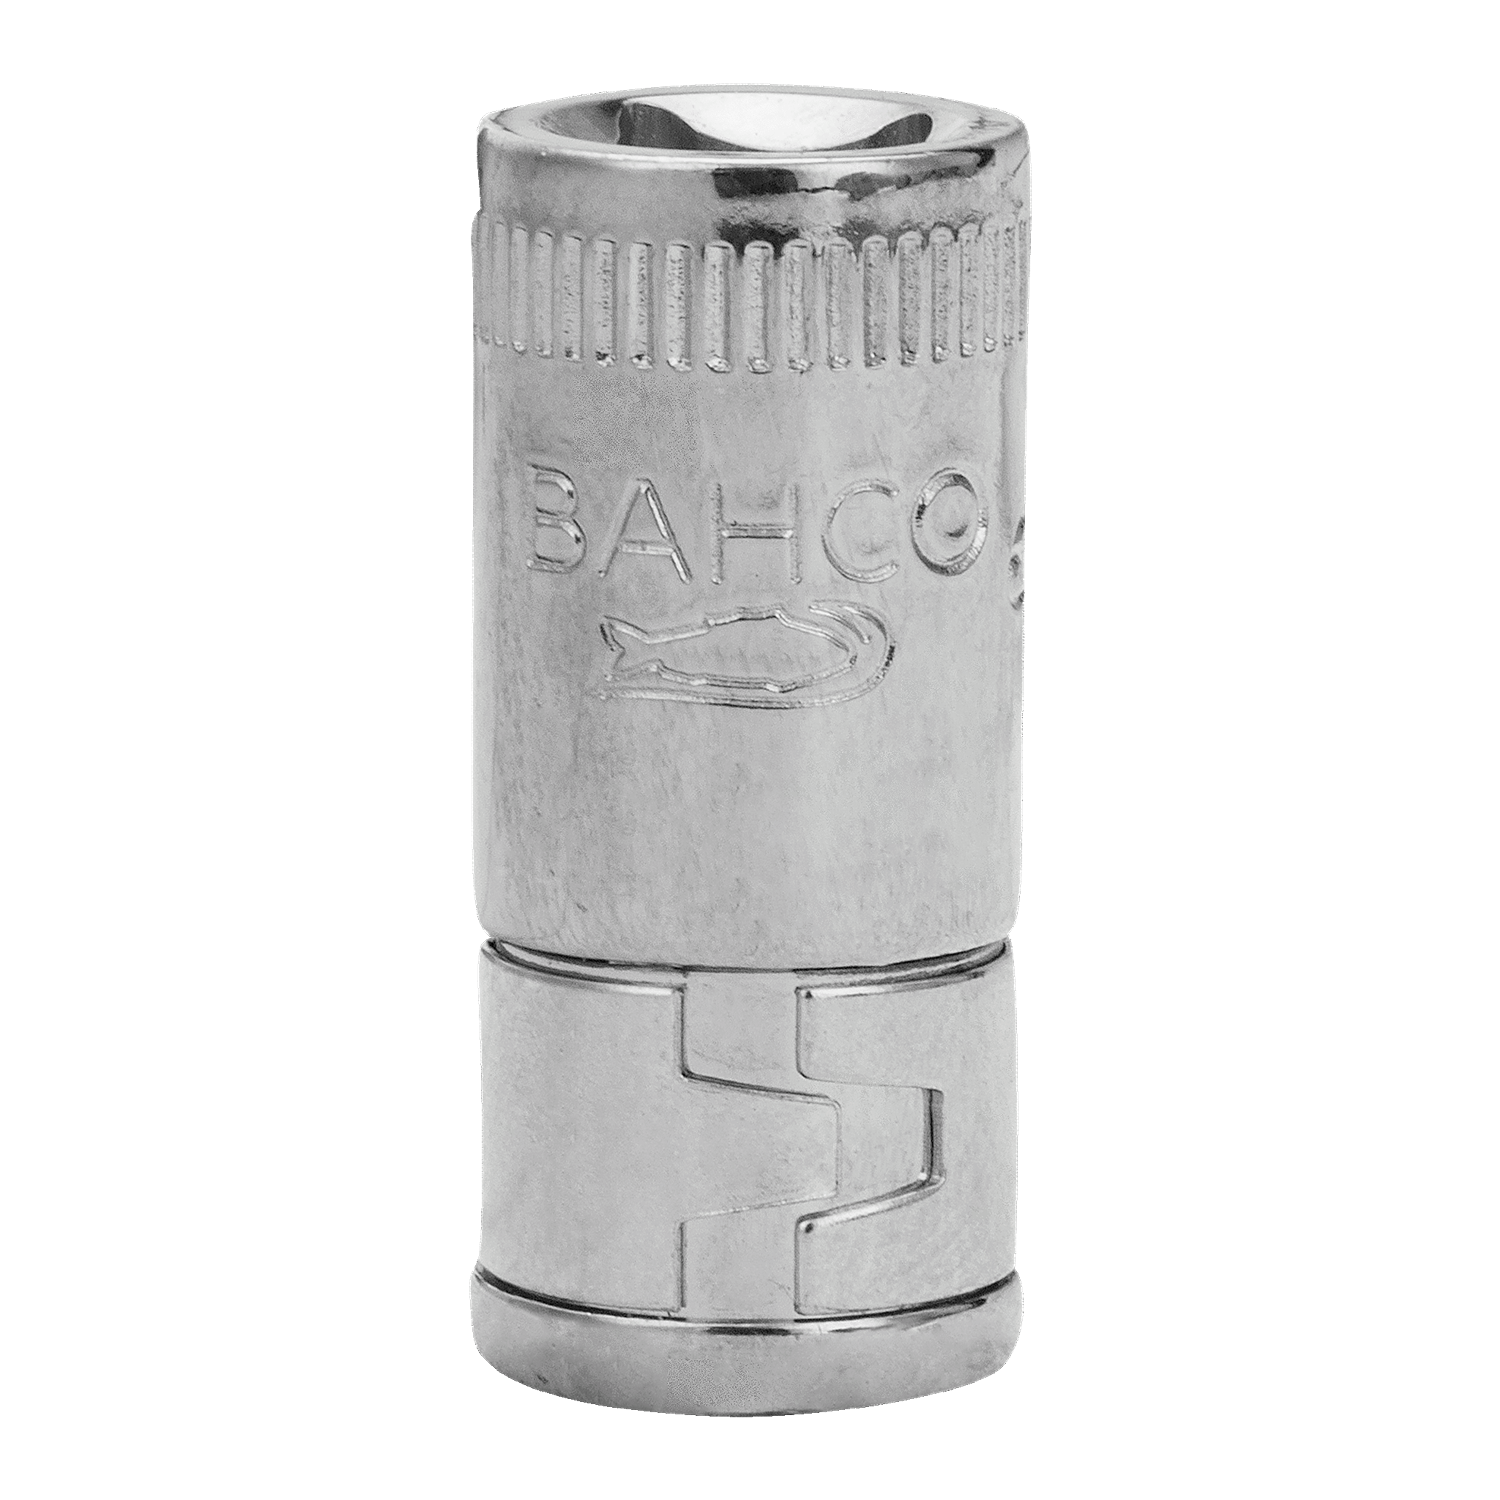 BAHCO 6973A 1/4” Square Drive Adaptor hex Screwdriver Bit - Premium Screwdriver Bit from BAHCO - Shop now at Yew Aik.